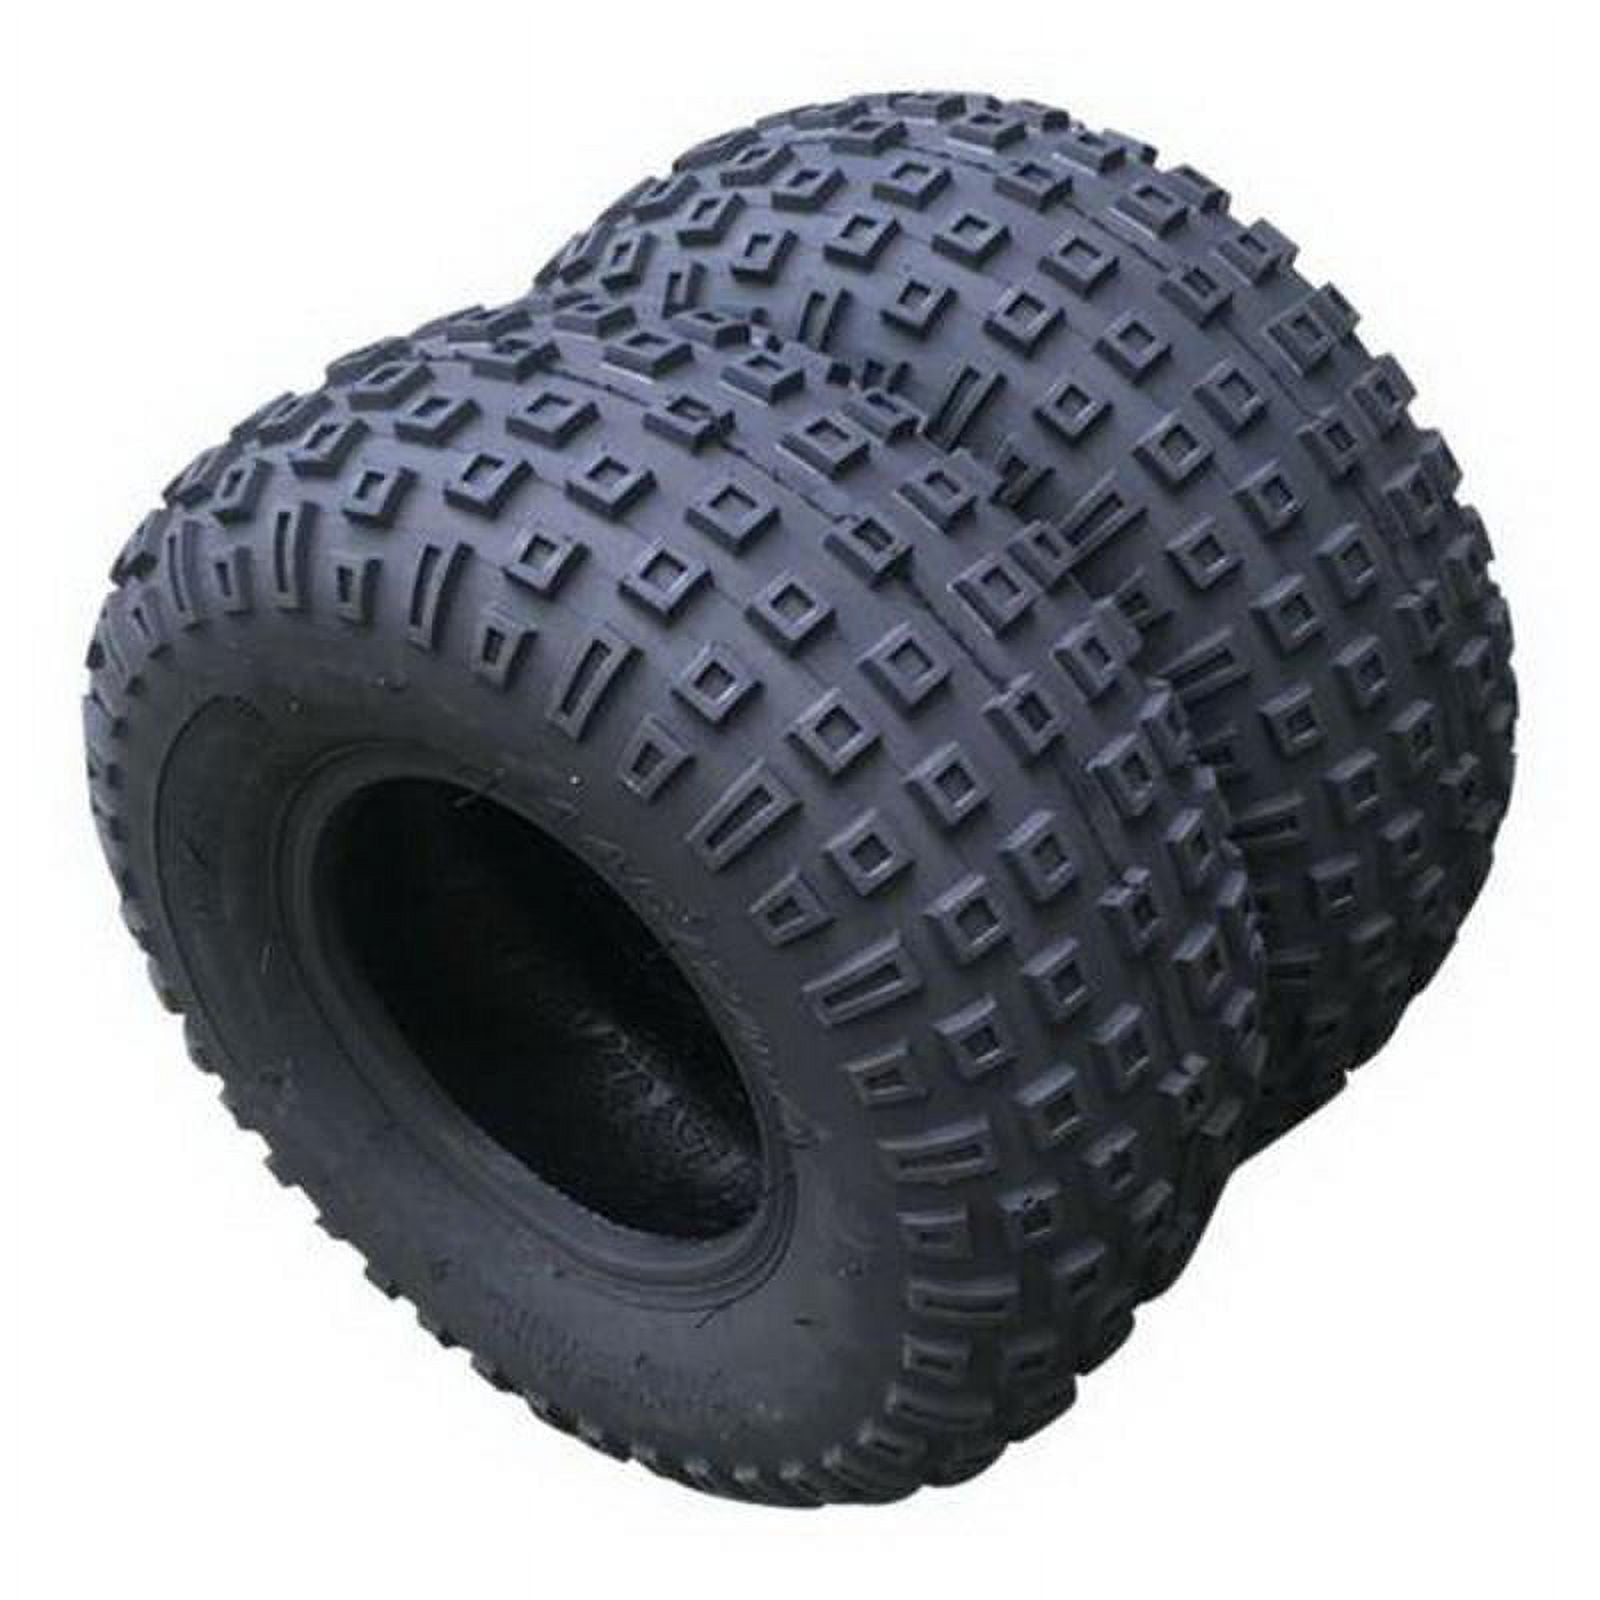 Brute Force Tires